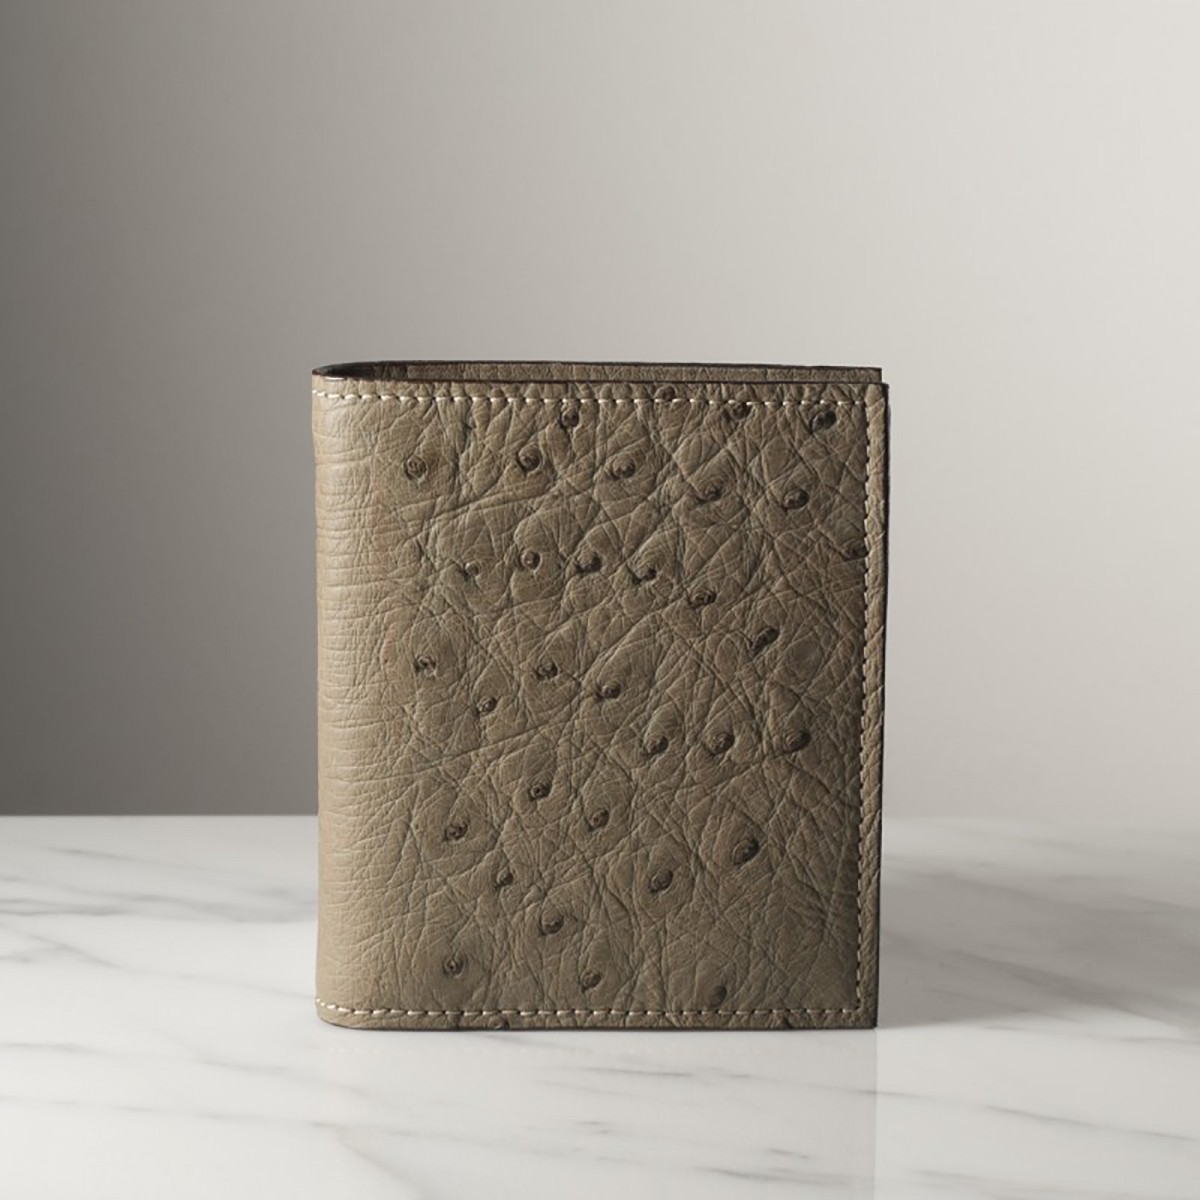 MARCO OSTRICH - Ostrich leather wallet, handmade in Italy